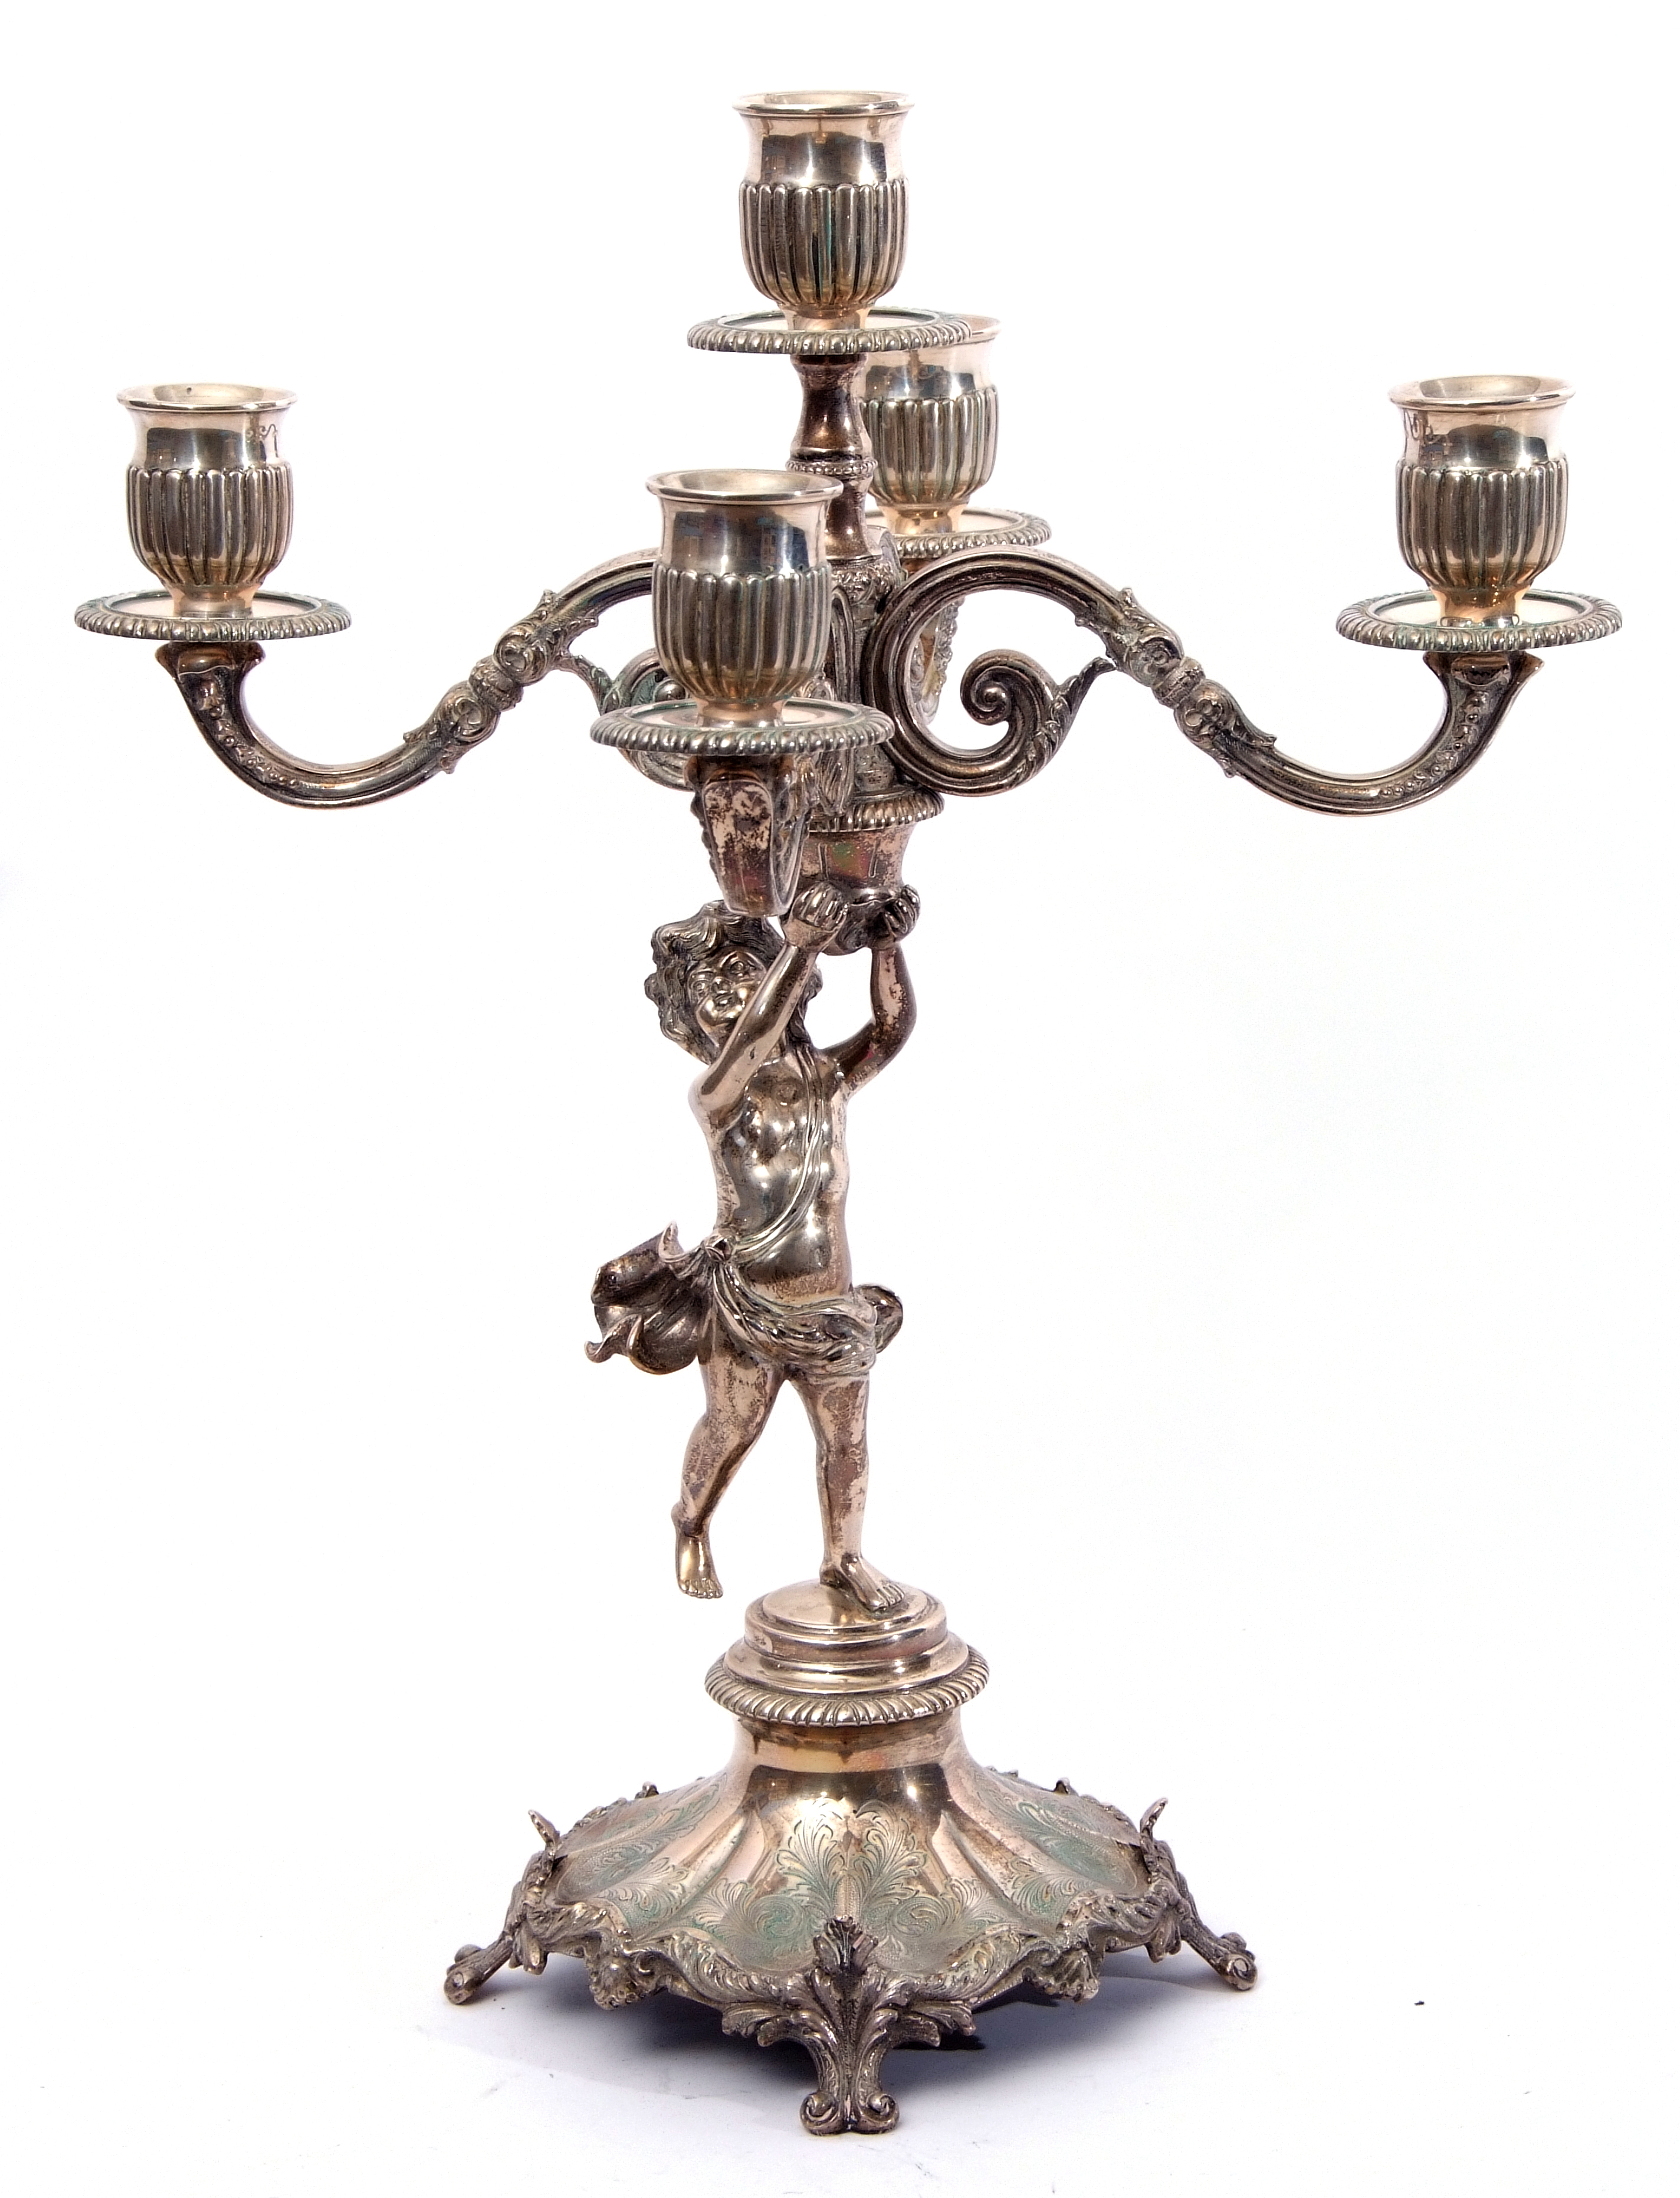 Late 19th/early 20th century silver plated four-branch candelabrum, fluted sconces joined by